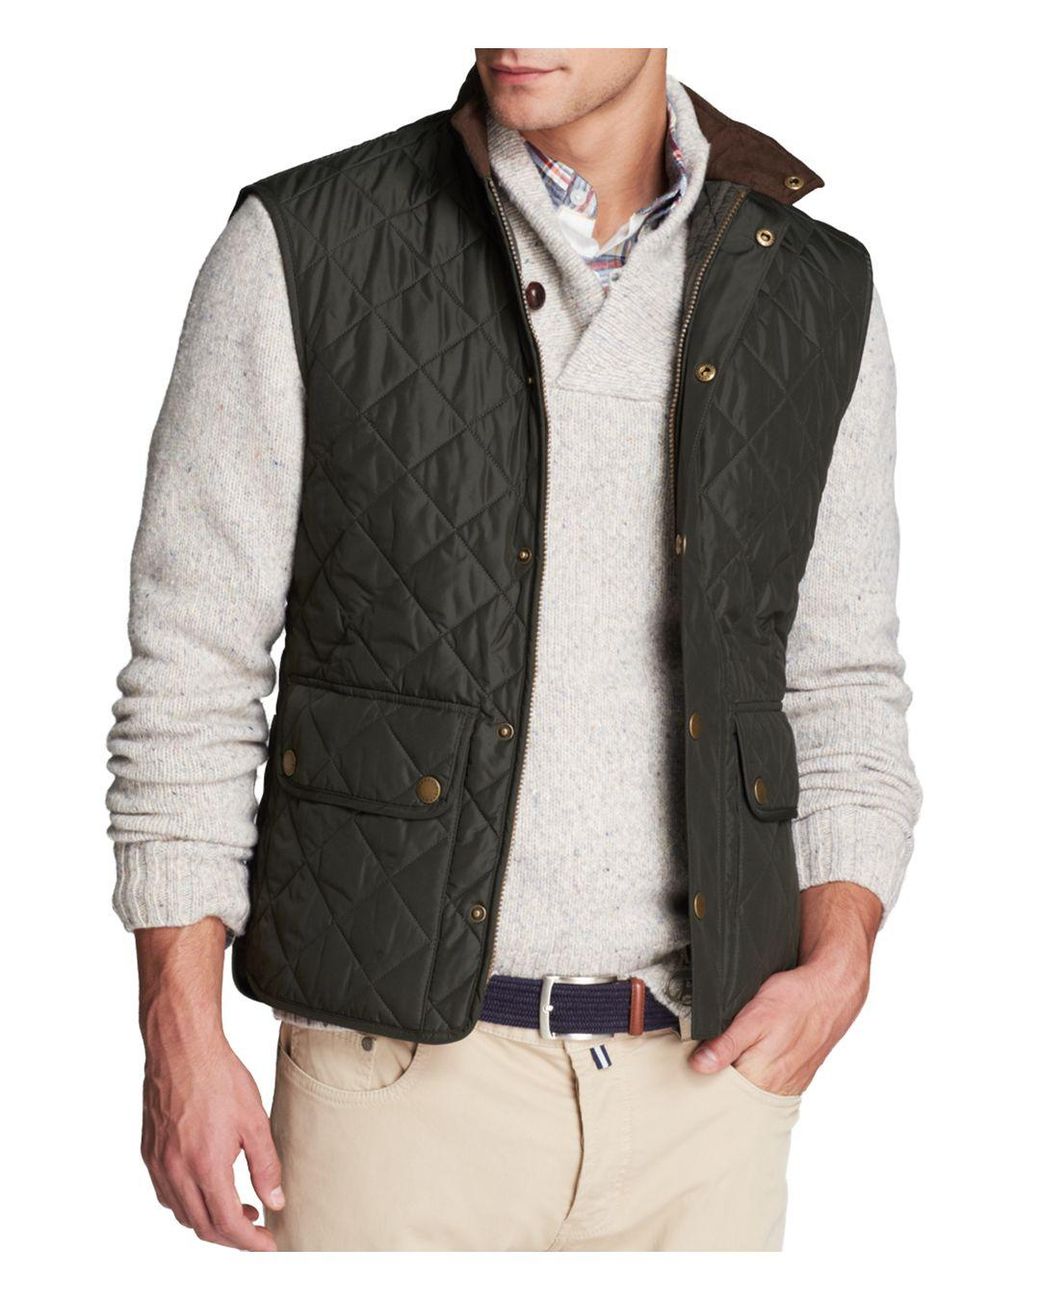 Barbour Lowerdale Gilet Clearance - www.puzzlewood.net 1696021480